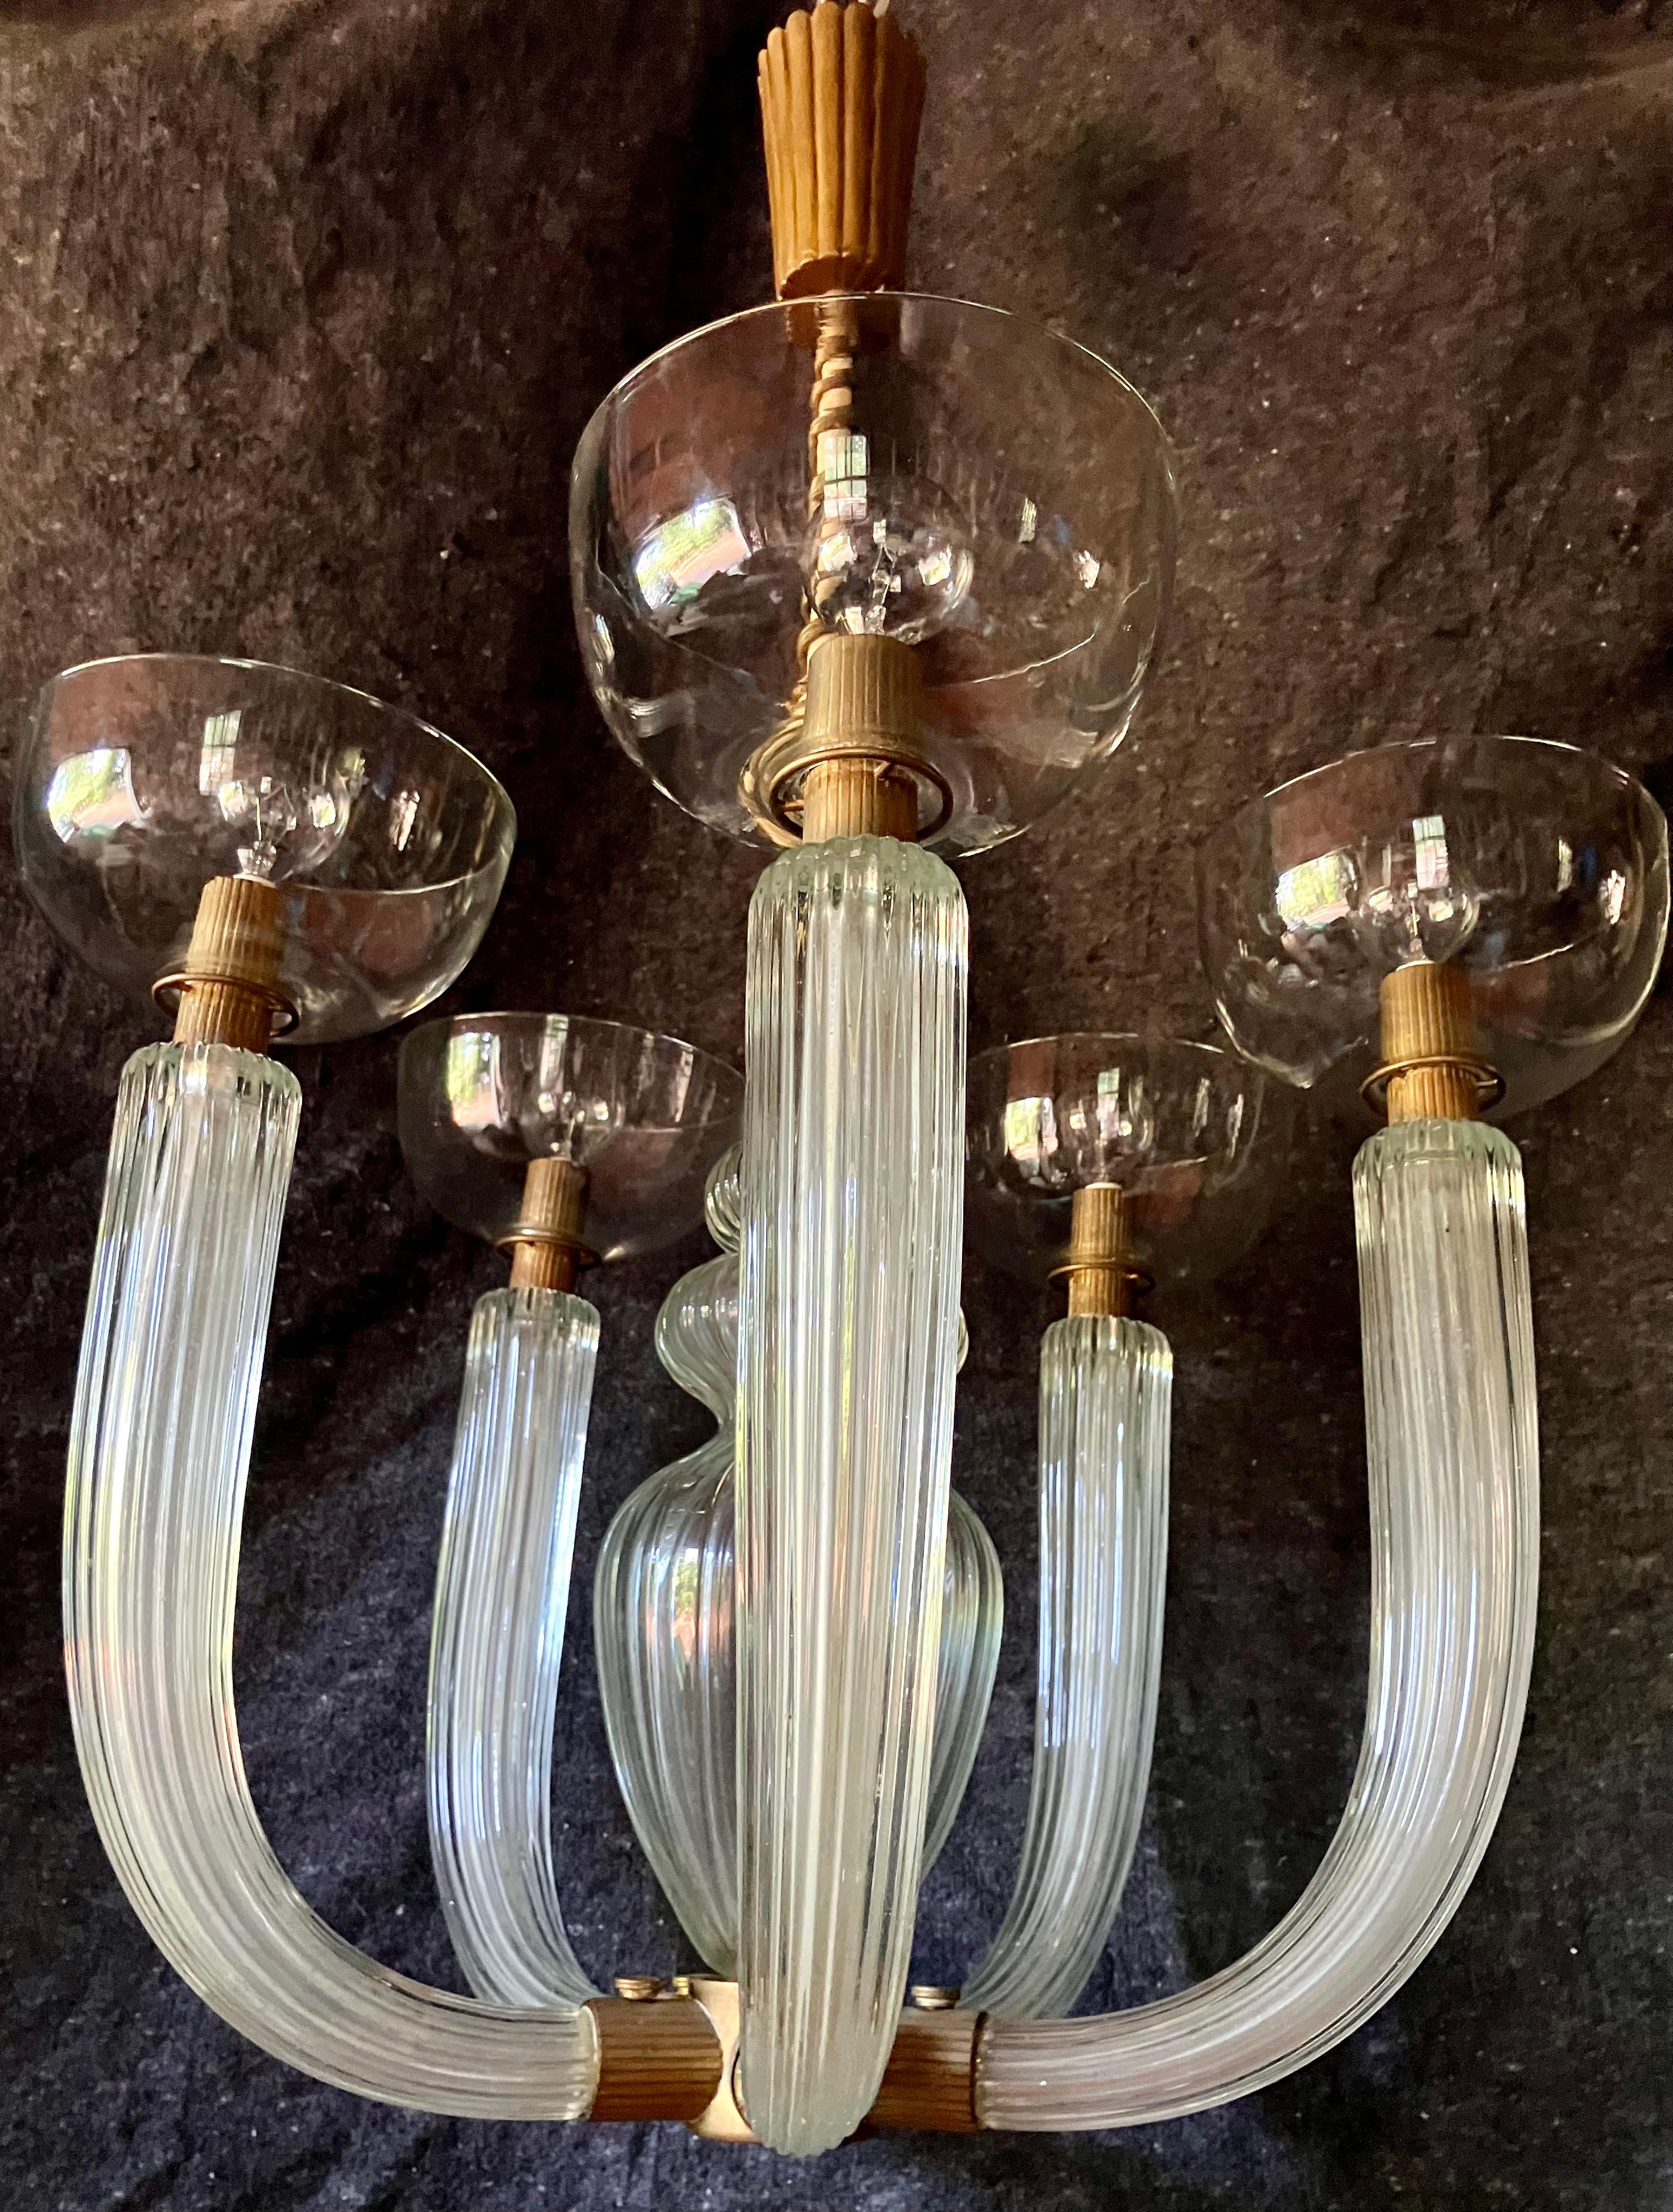 Carlos Scarpa five armed chandelier. Five arm Venetian moderne unmistakably Scarpa design pendant in reeded glass with central baluster issuing coiled brass on white painted metal stem spiraling up to gold painted and reeded metal  canopy. Carlo